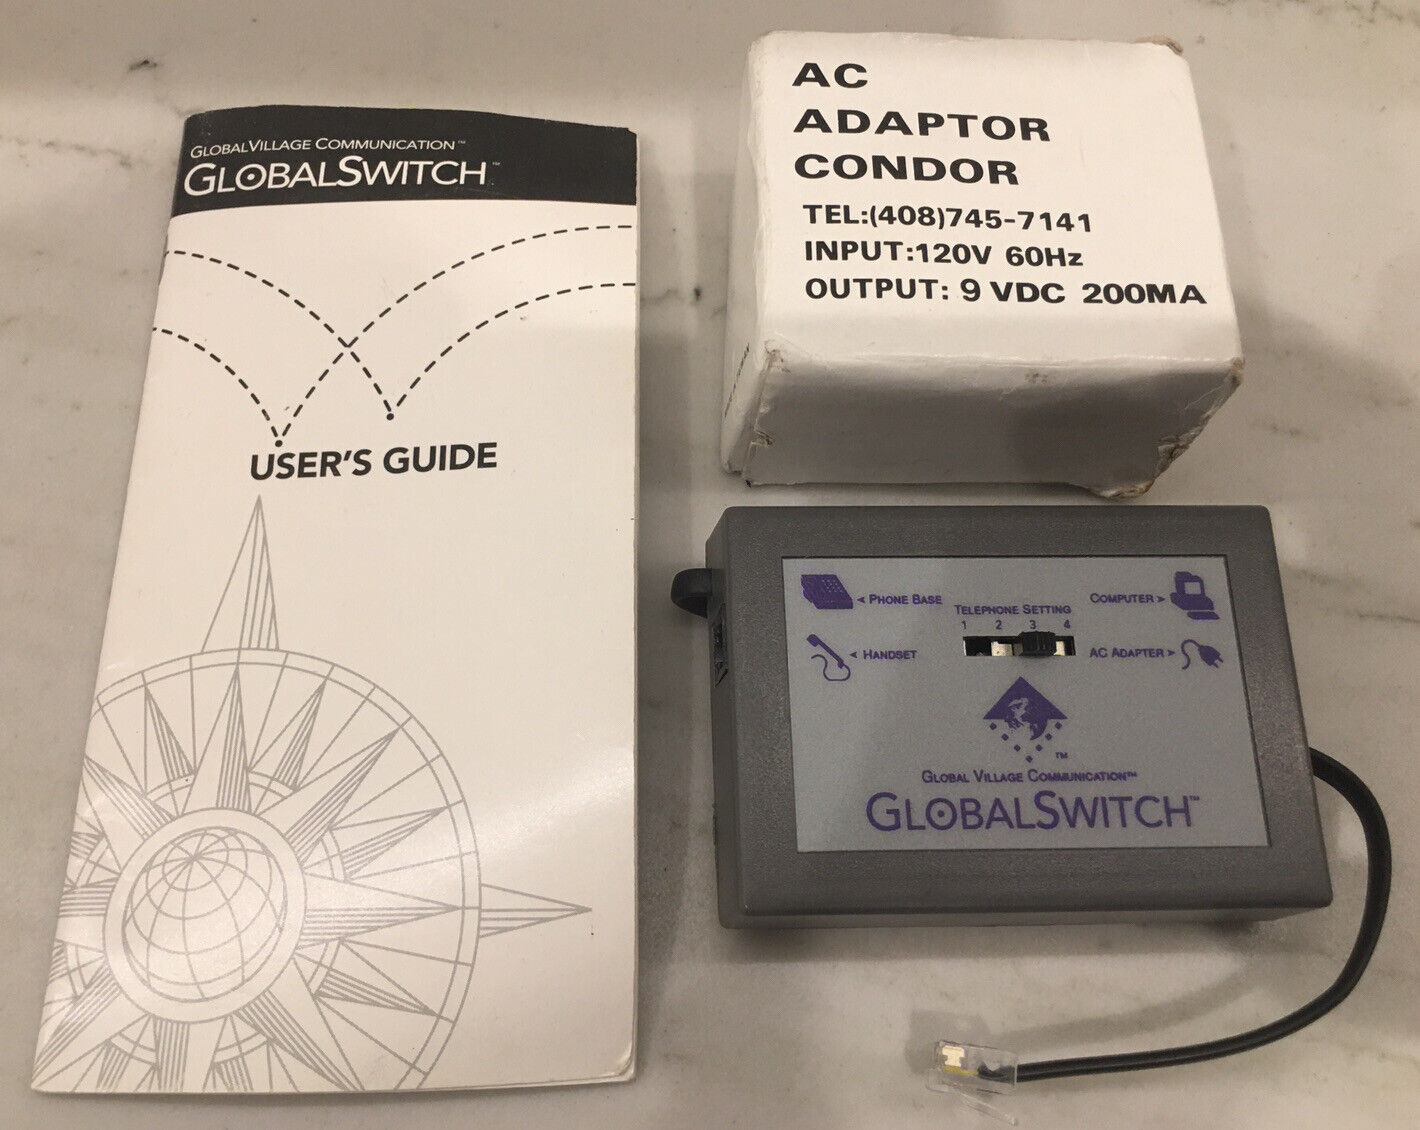 Global Village Communication GlobalSwitch for PowerBook or TelePort fax/moded